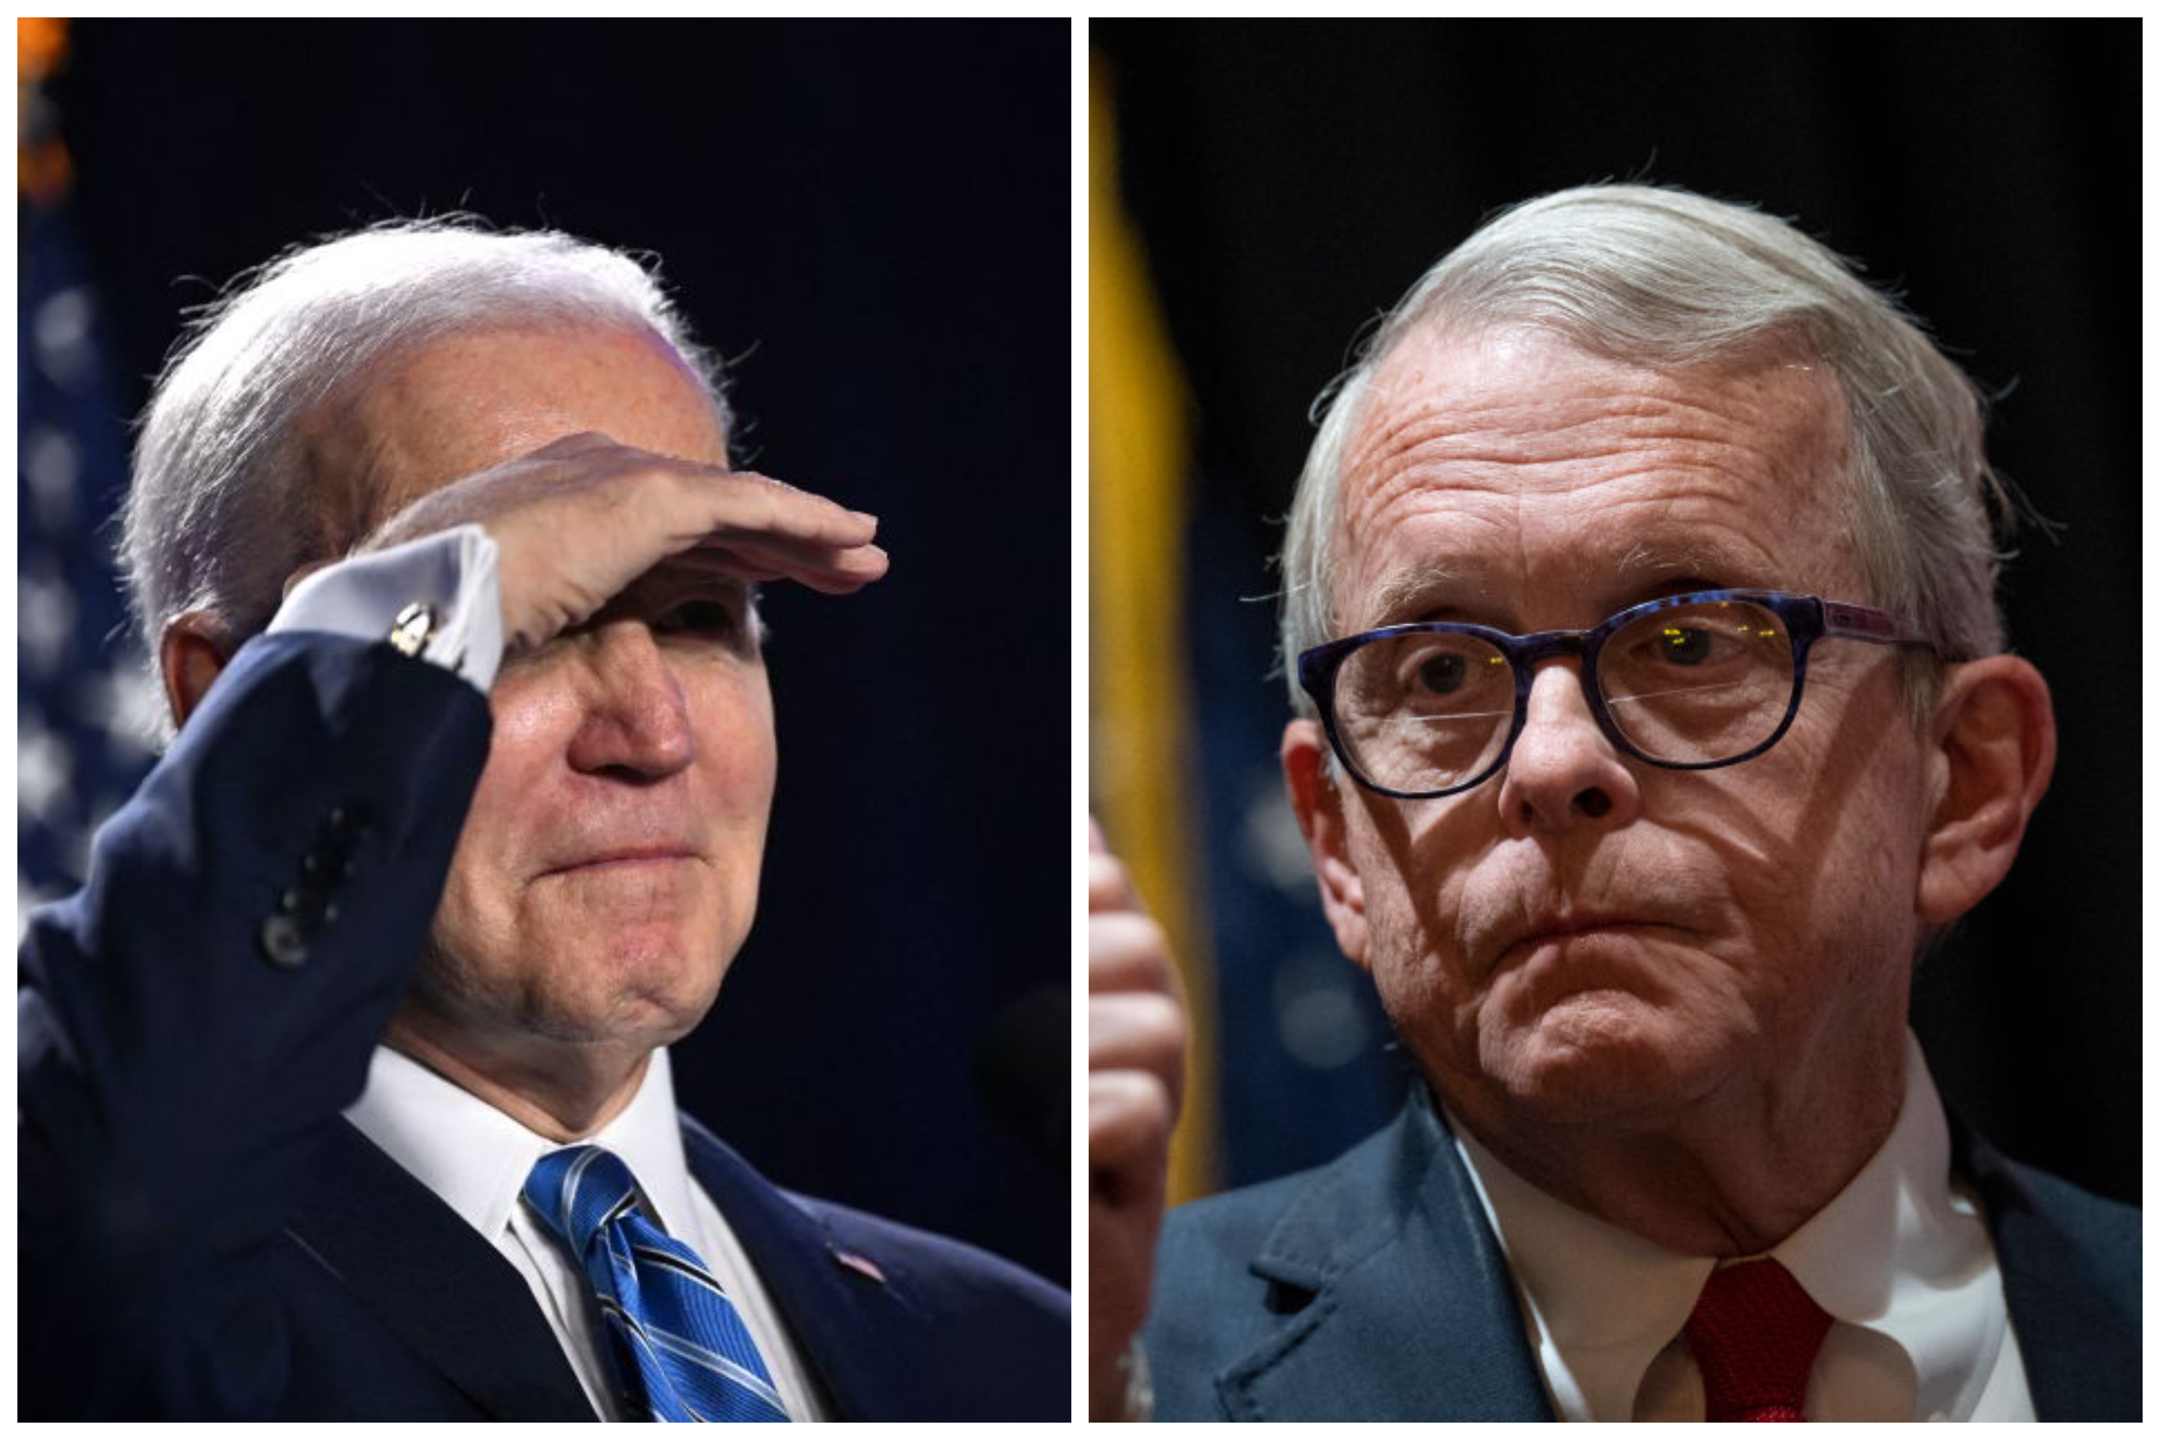 DeWine: ‘The President Needs To Come’ To East Palestine. Biden: I’ll ‘Be Out There At Some Point’